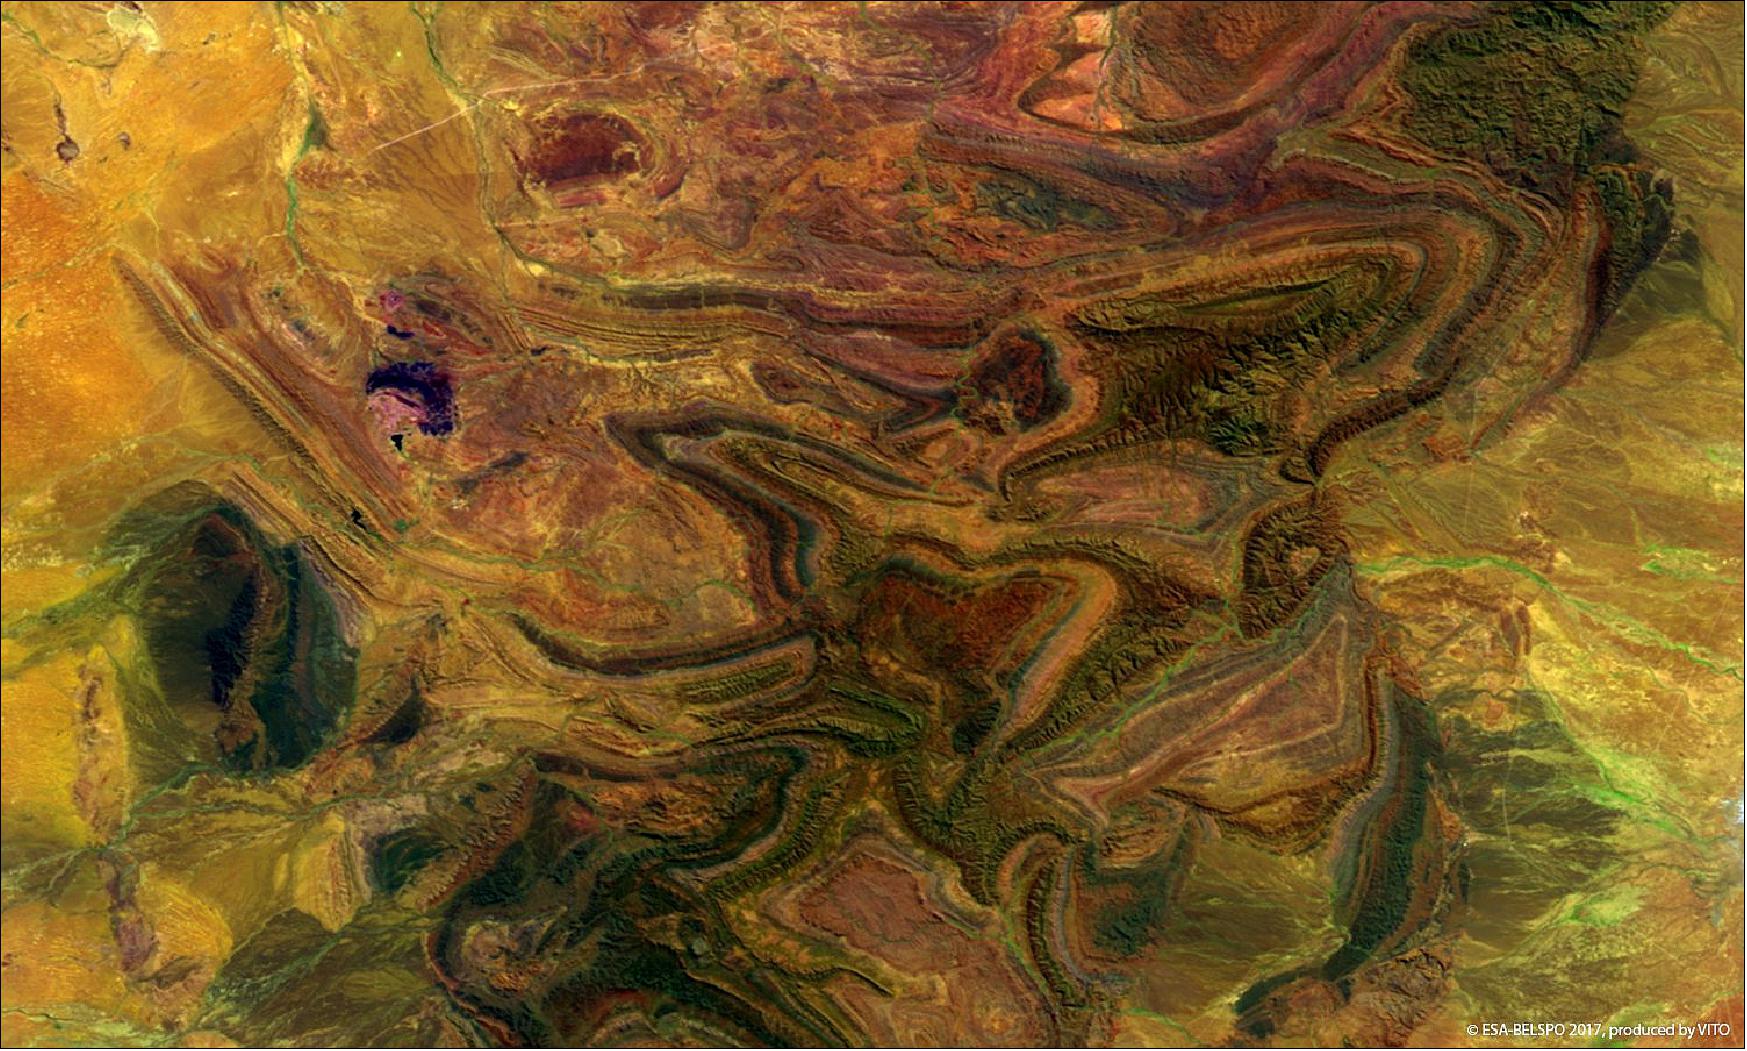 Figure 41: PROBA-V false-color image of Flinders Range, Australia, showing the northern part of the rugged, weathered peaks and rocky gorges of the Flinders Ranges, the largest mountain range in the South Australian Outback (image credit: ESA-BELSPO 2017, produced by VITO)